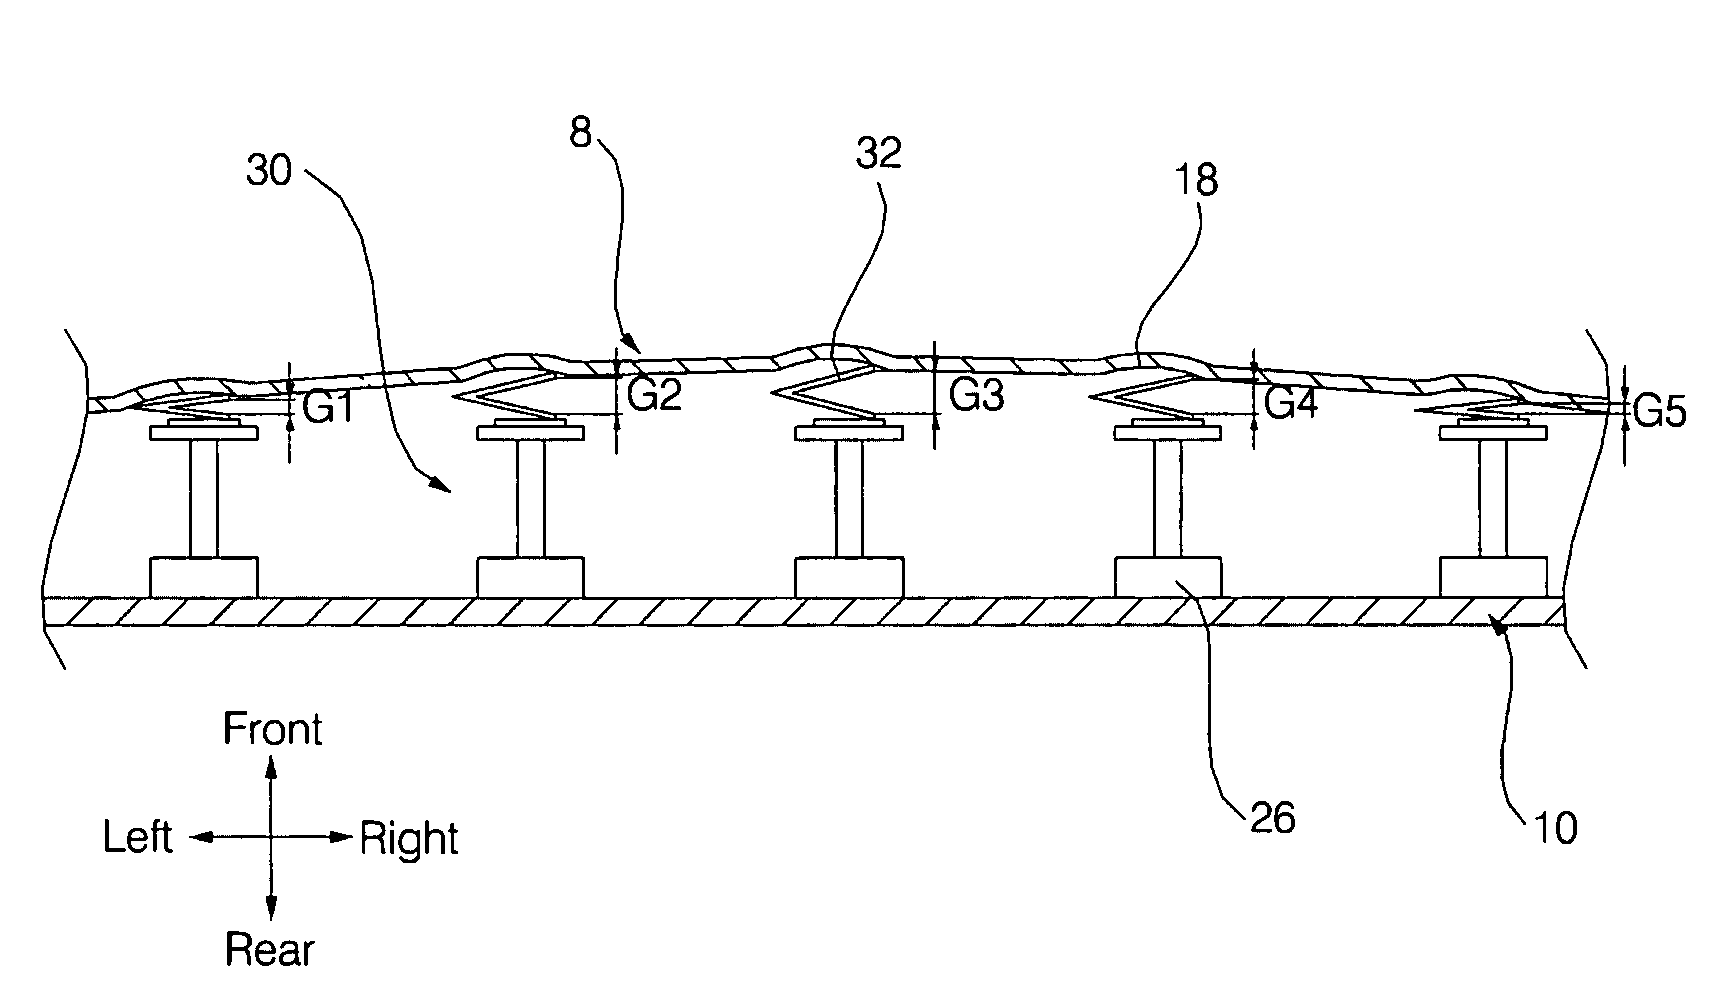 Capacitive switch of electric/electronic device